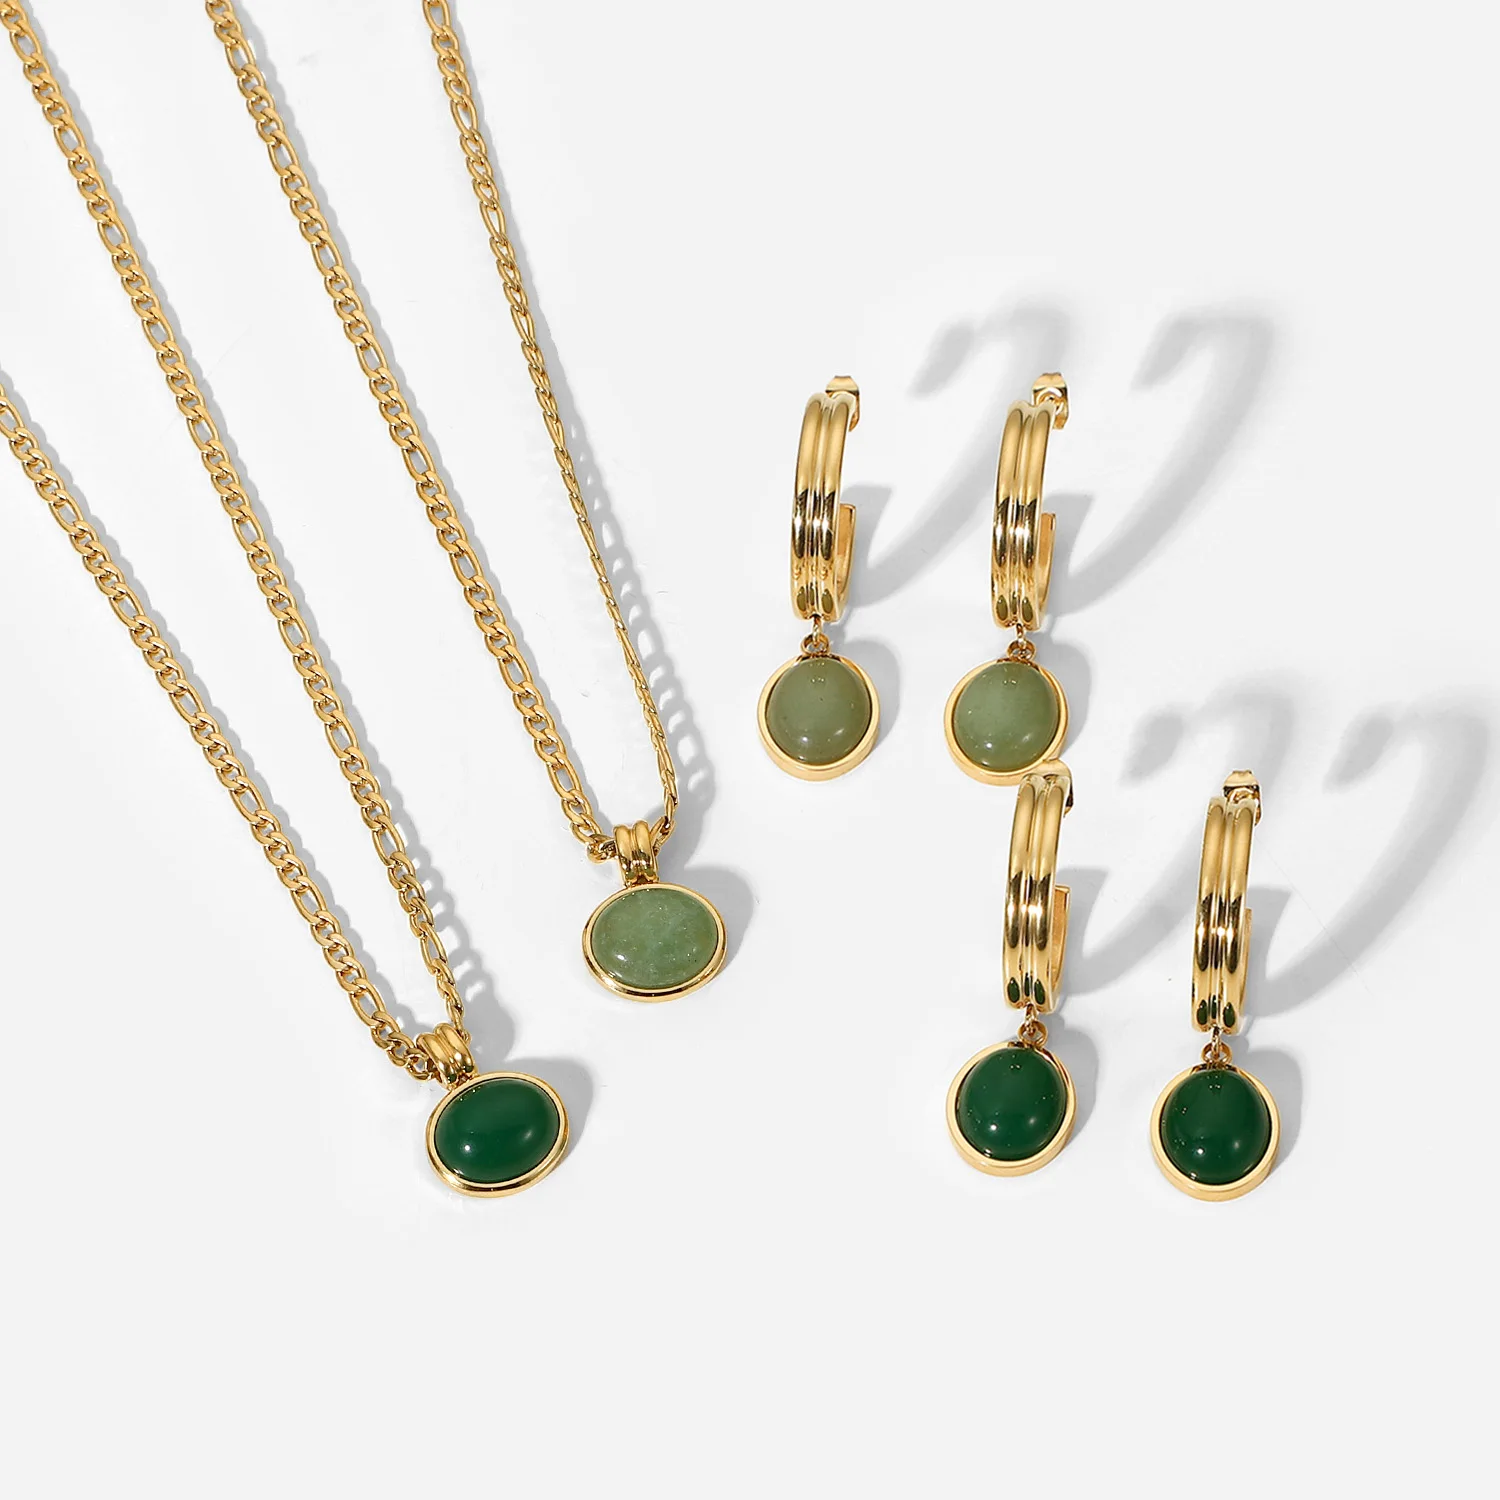 

14k Gold Pvd Plated Stainless Steel Jewelry Sets CC Shaped Green Agate Pendant Necklace Hoop Earrings For Women